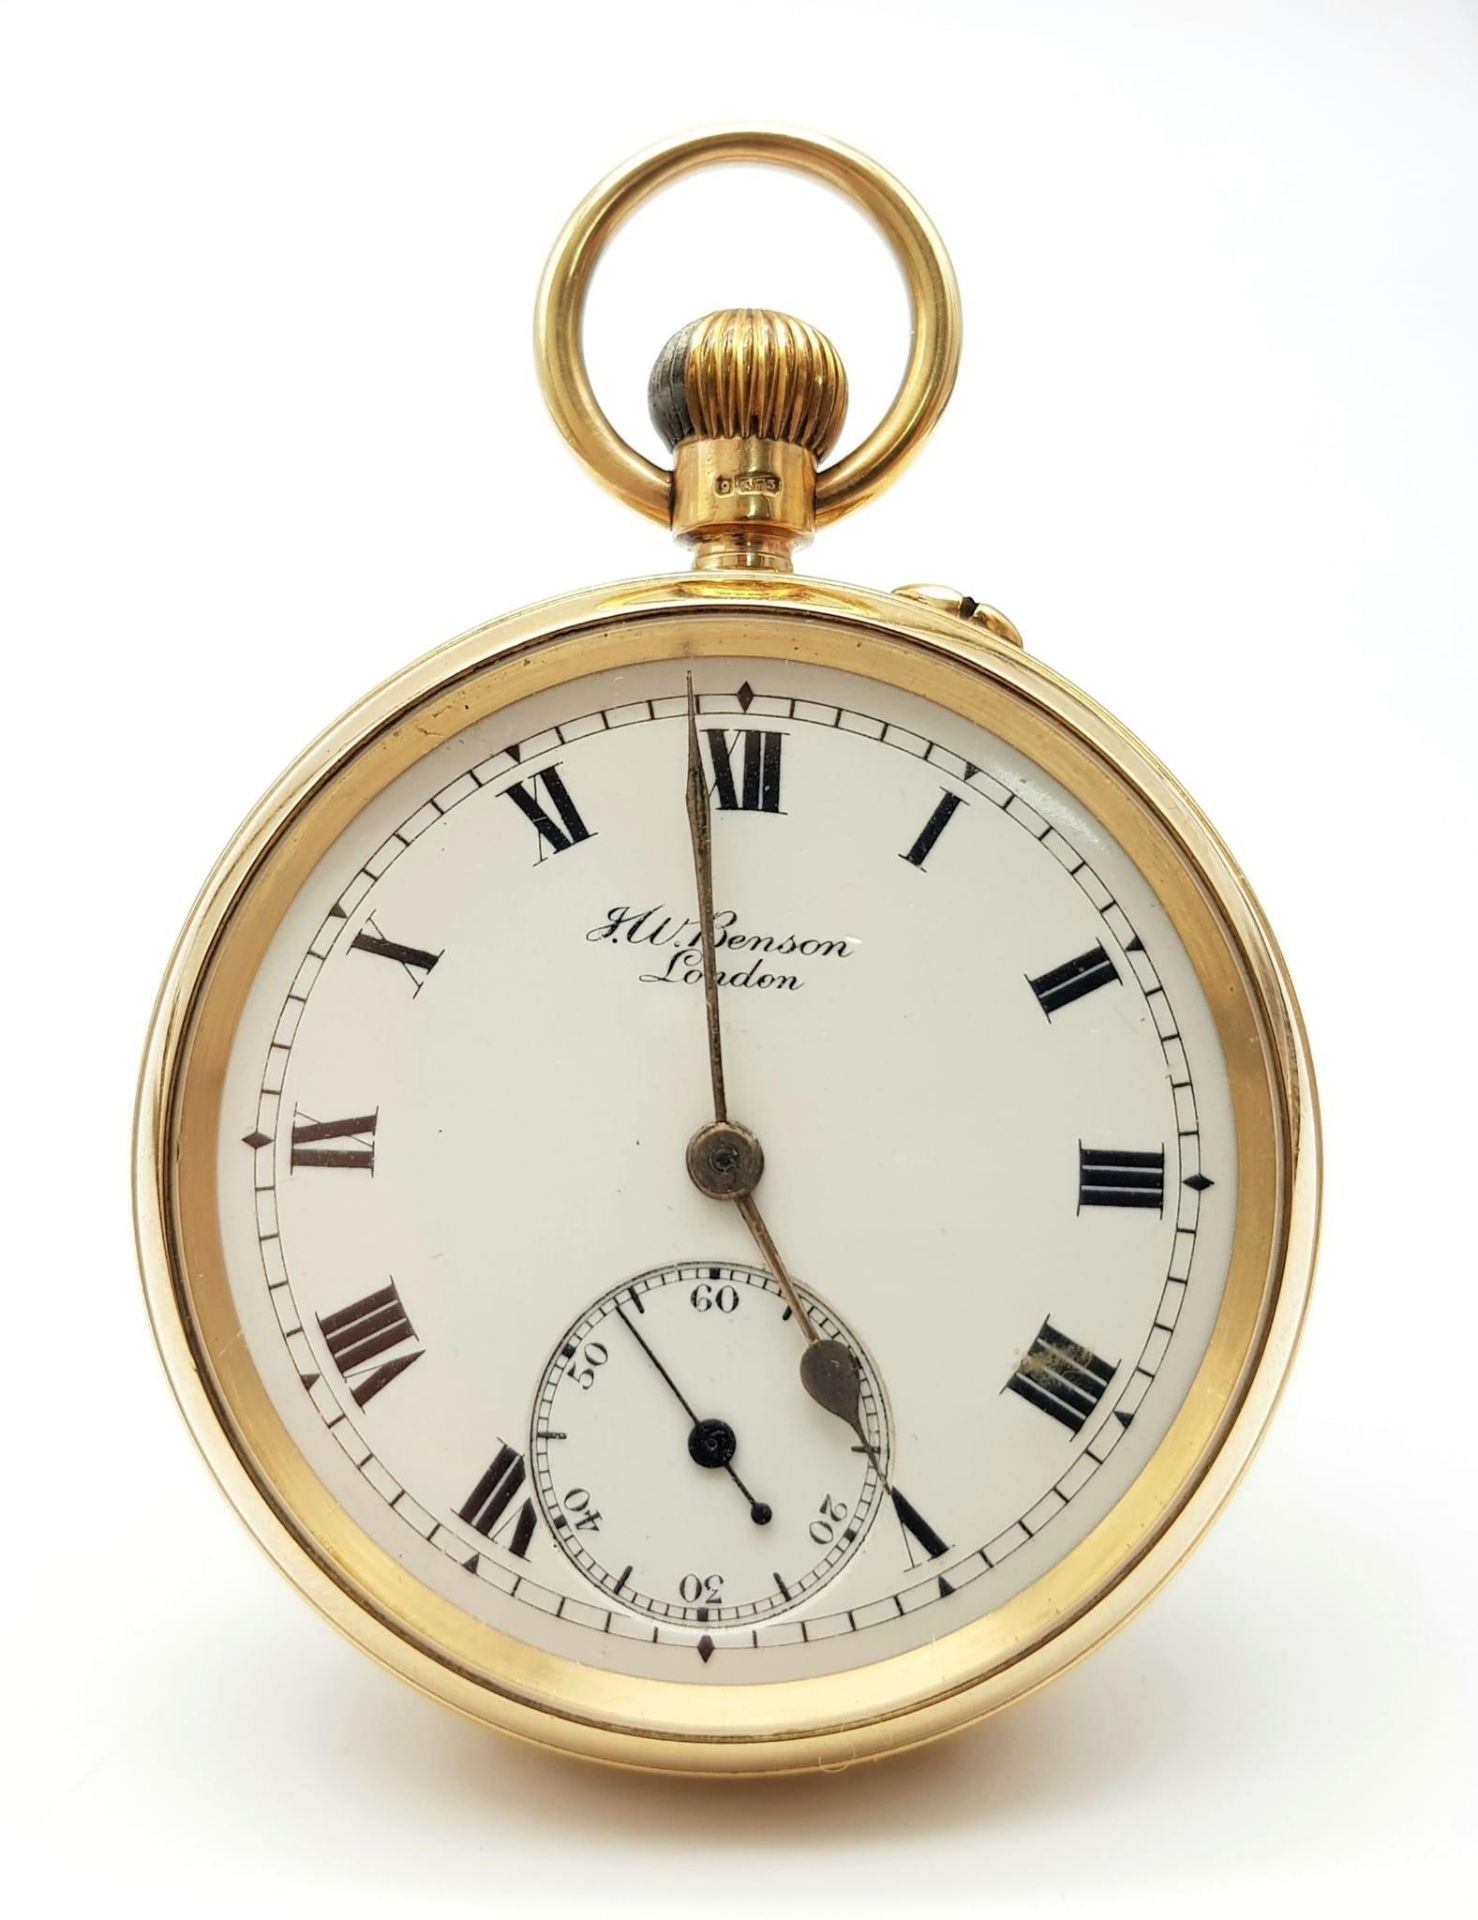 A J.W.BENSON 9K GOLD WATCH DATED 1927 AND BEING IN VERY NICE CONDITION IN ITS ORIGINAL